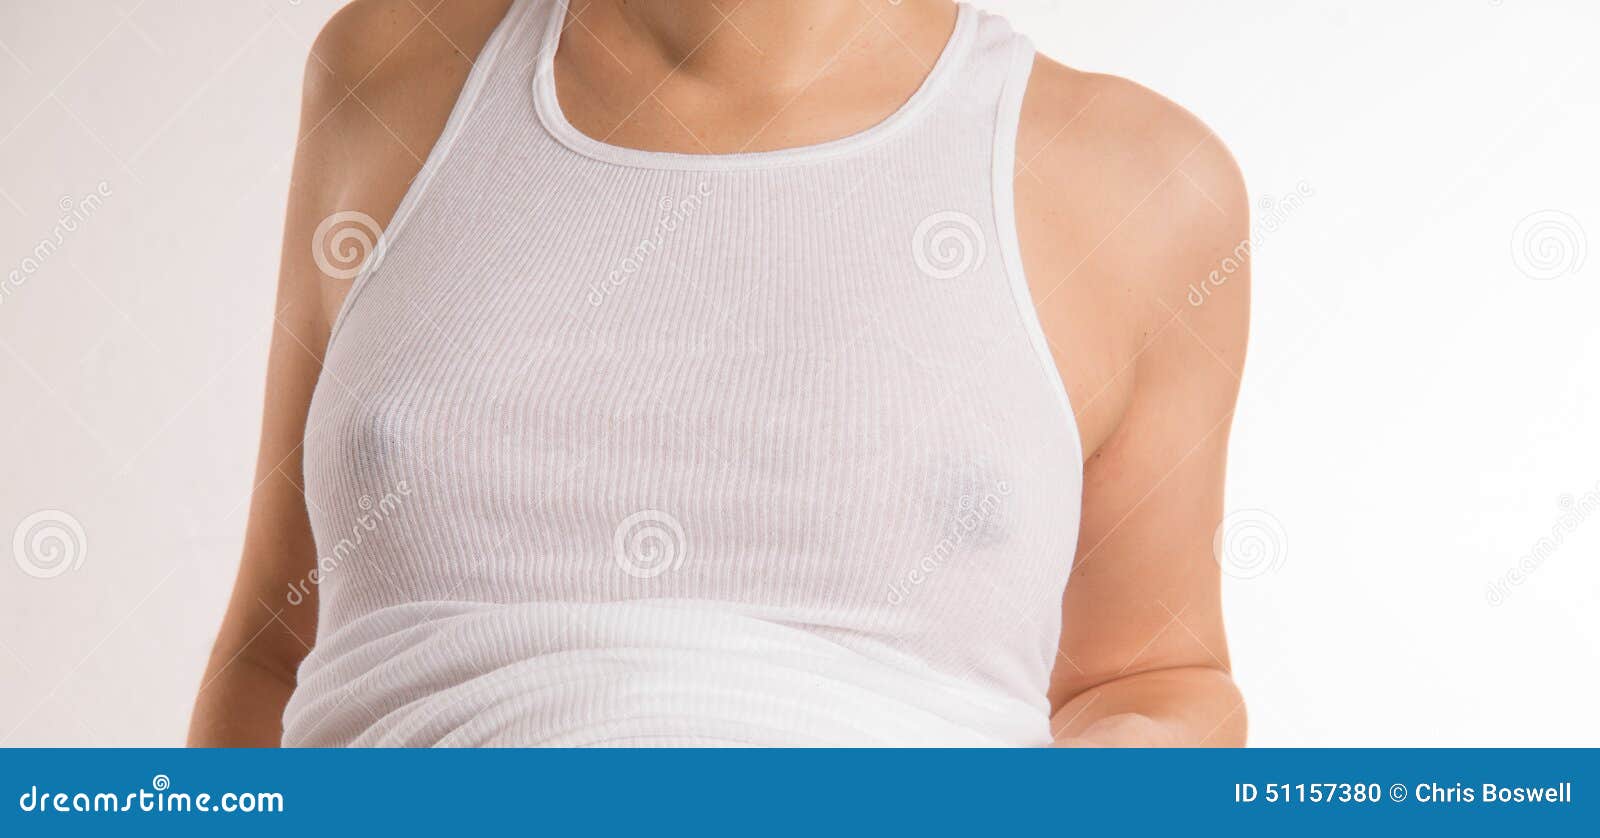 Pregnant Woman Braless Breasts Wearing White Wife Beater Tank Top